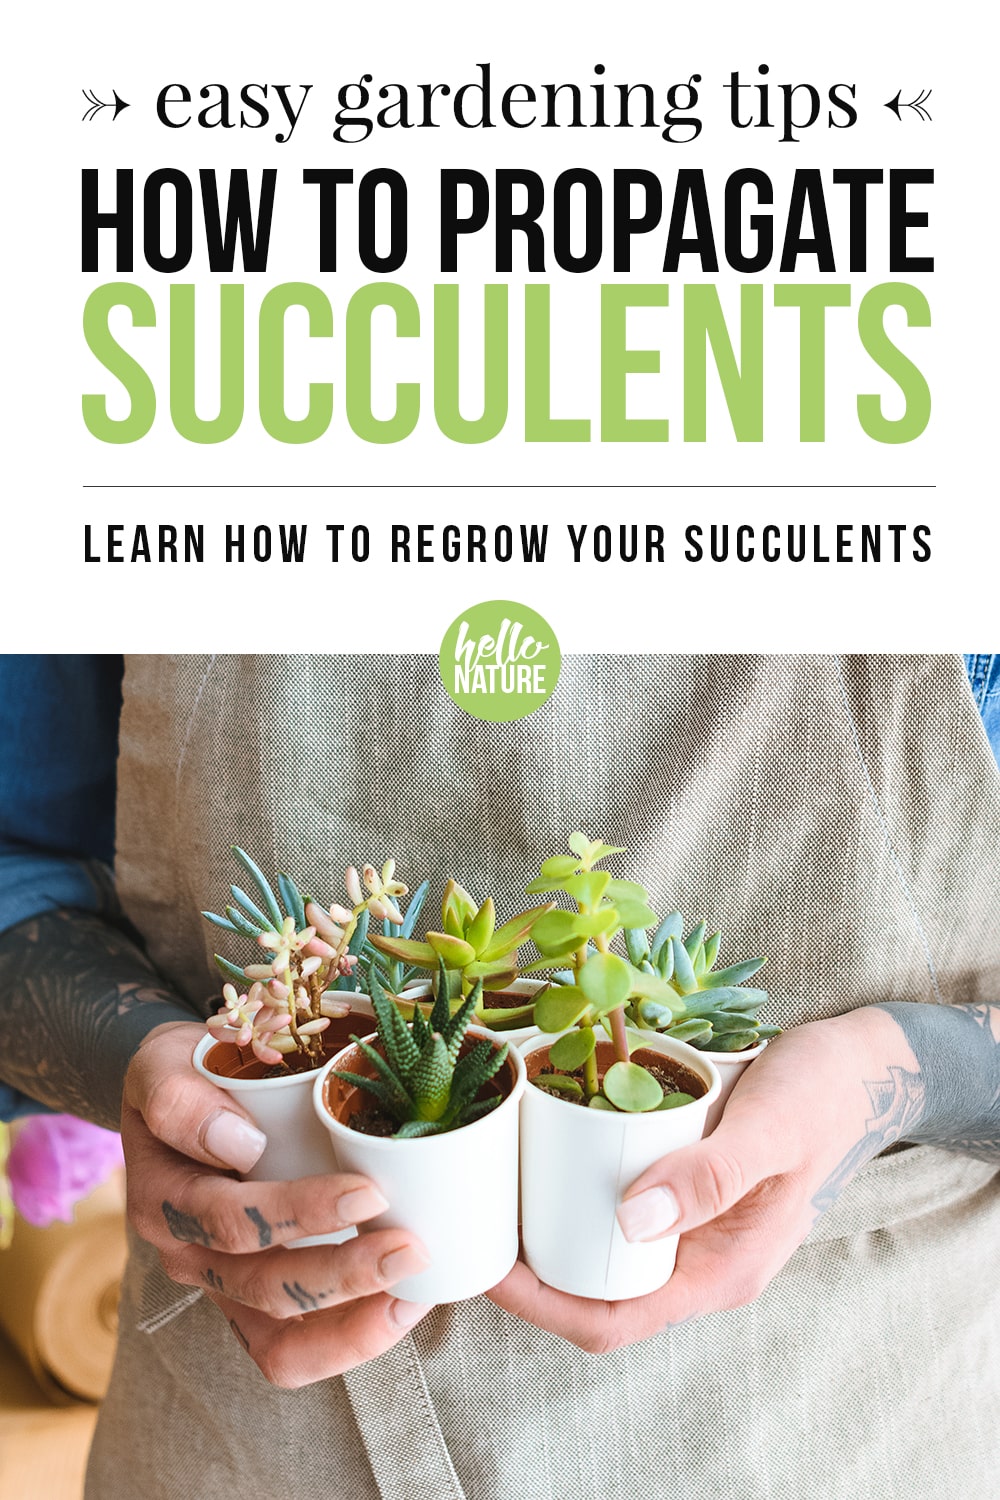 A quick and easy guide on how to propagate succulents. It'll help even those with the blackest of thumbs regrow succulents from the leaves of other succulents. You'll be surrounded in these cute little plants in no time! #Succulents #SucculentCare #Gardening